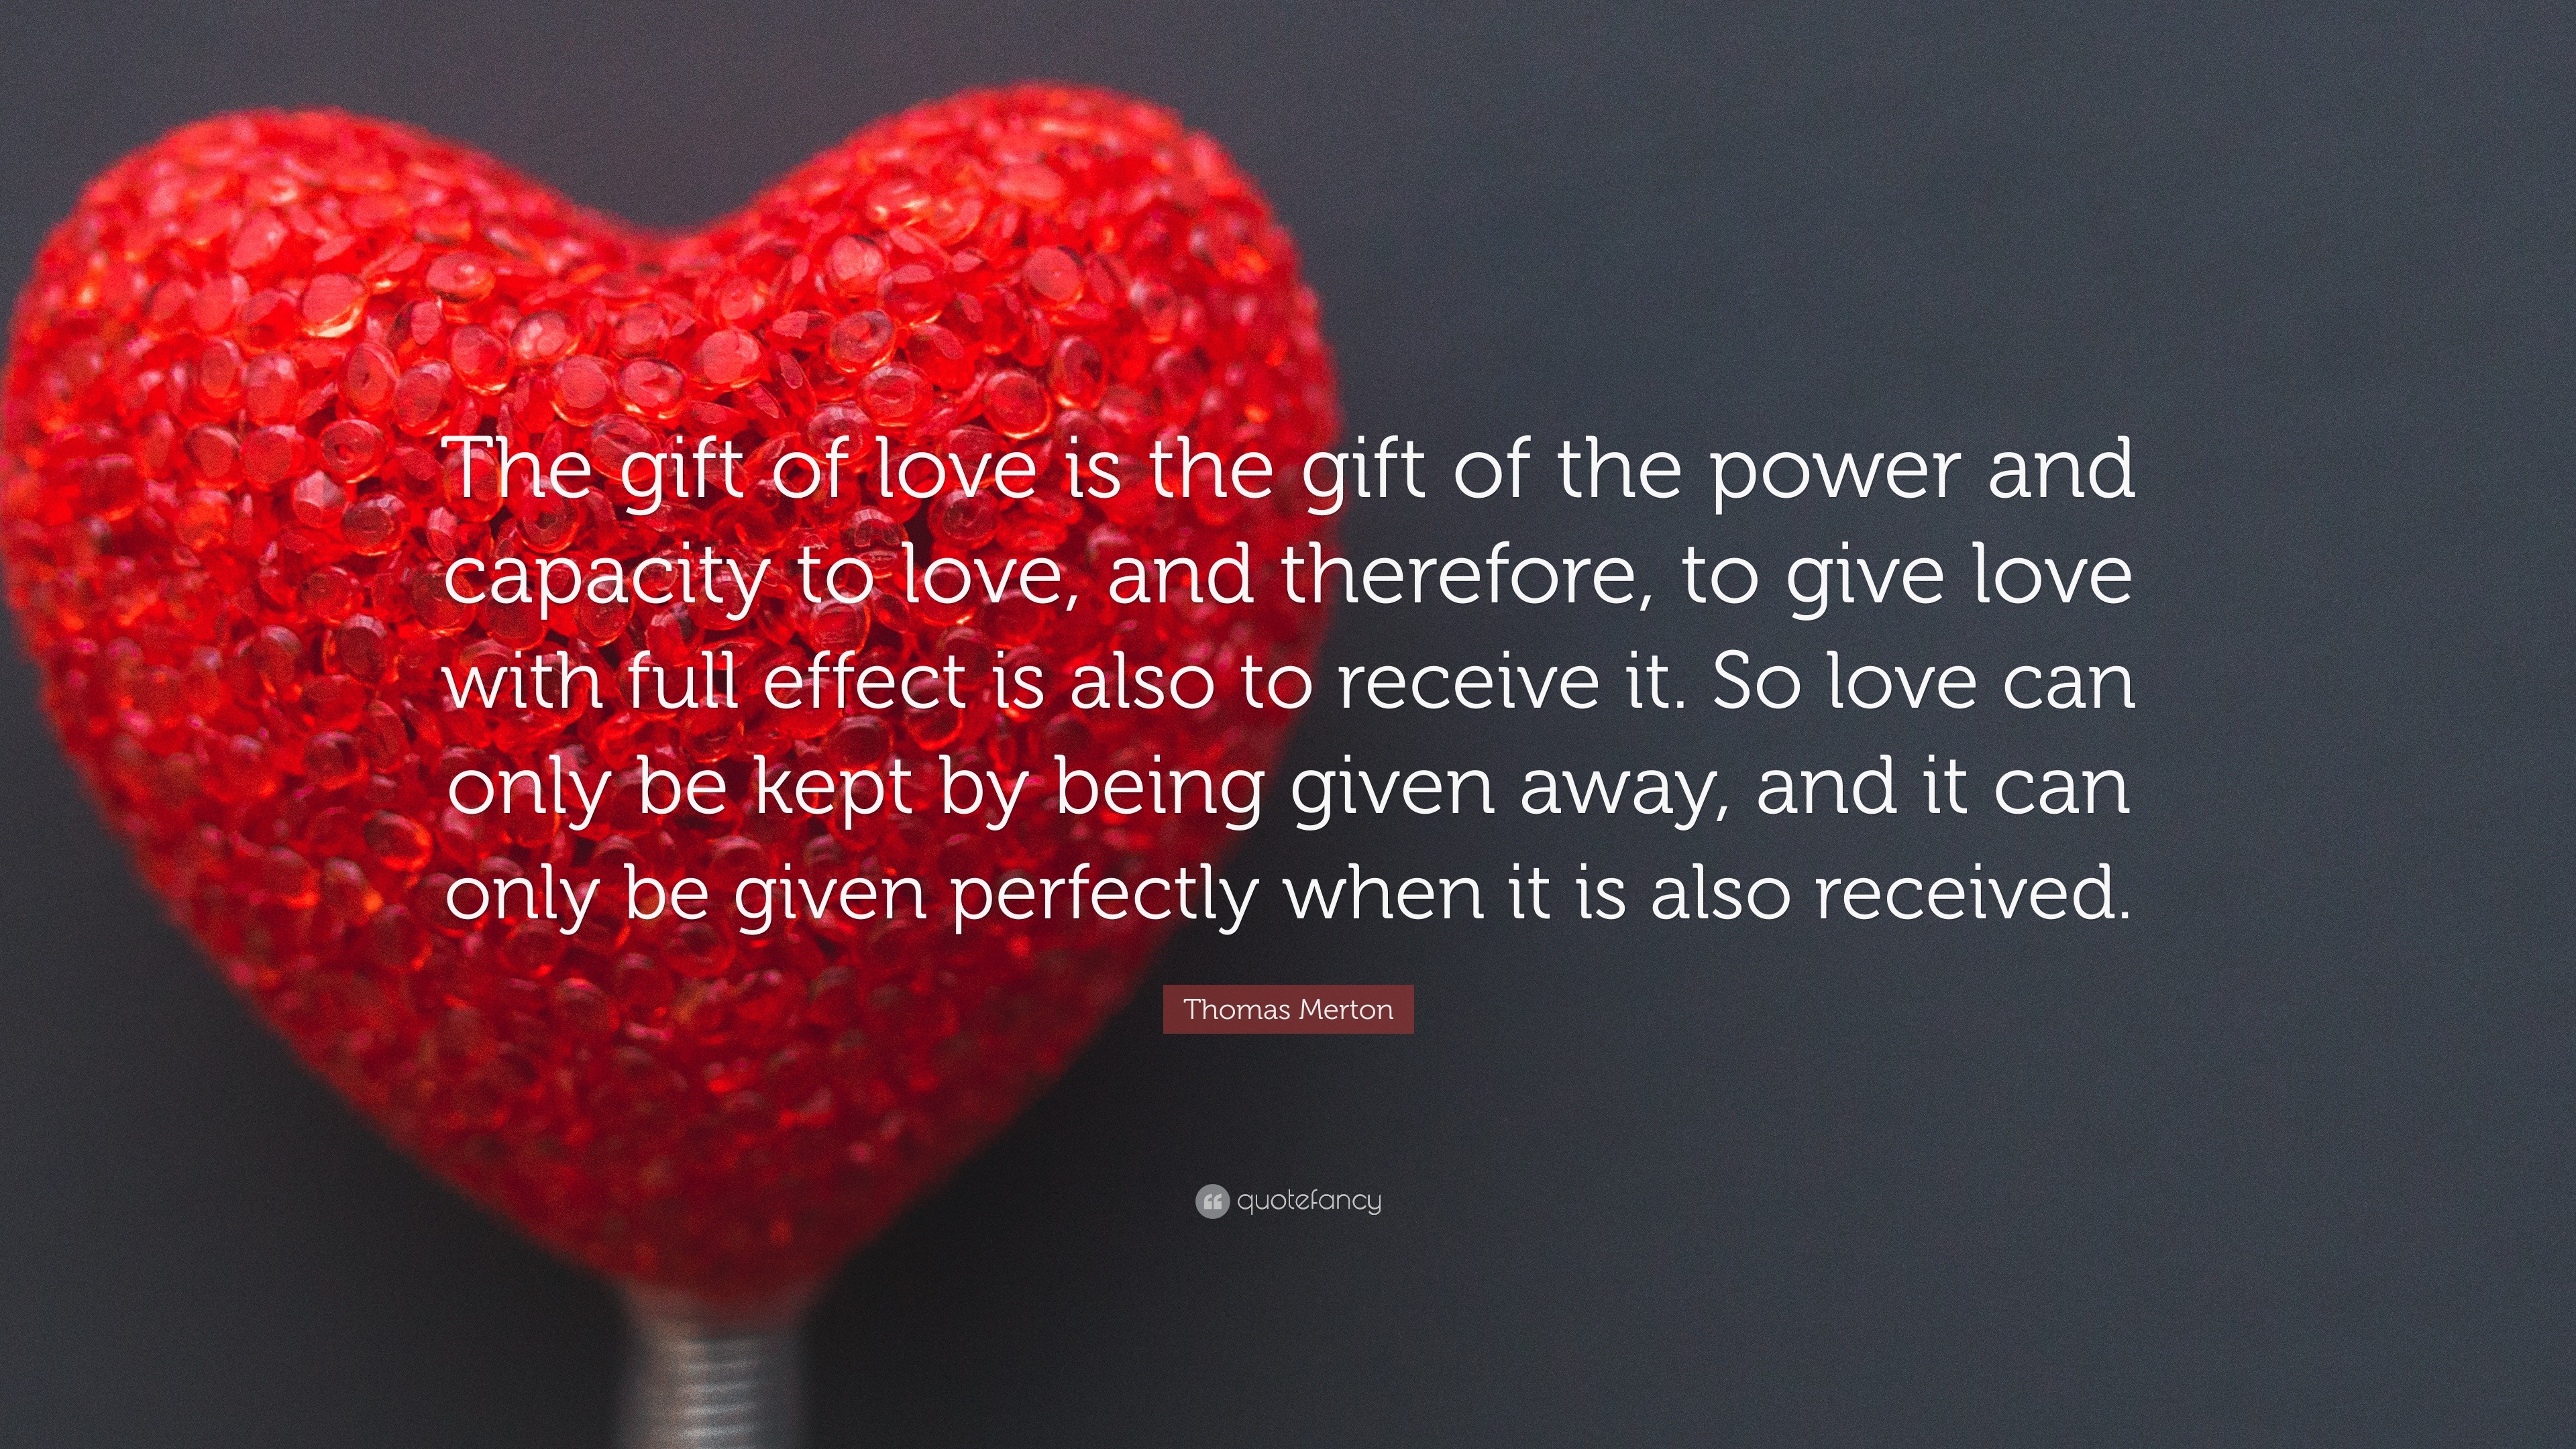 The gift of love is the gift of the power and capacity to love, and therefo...